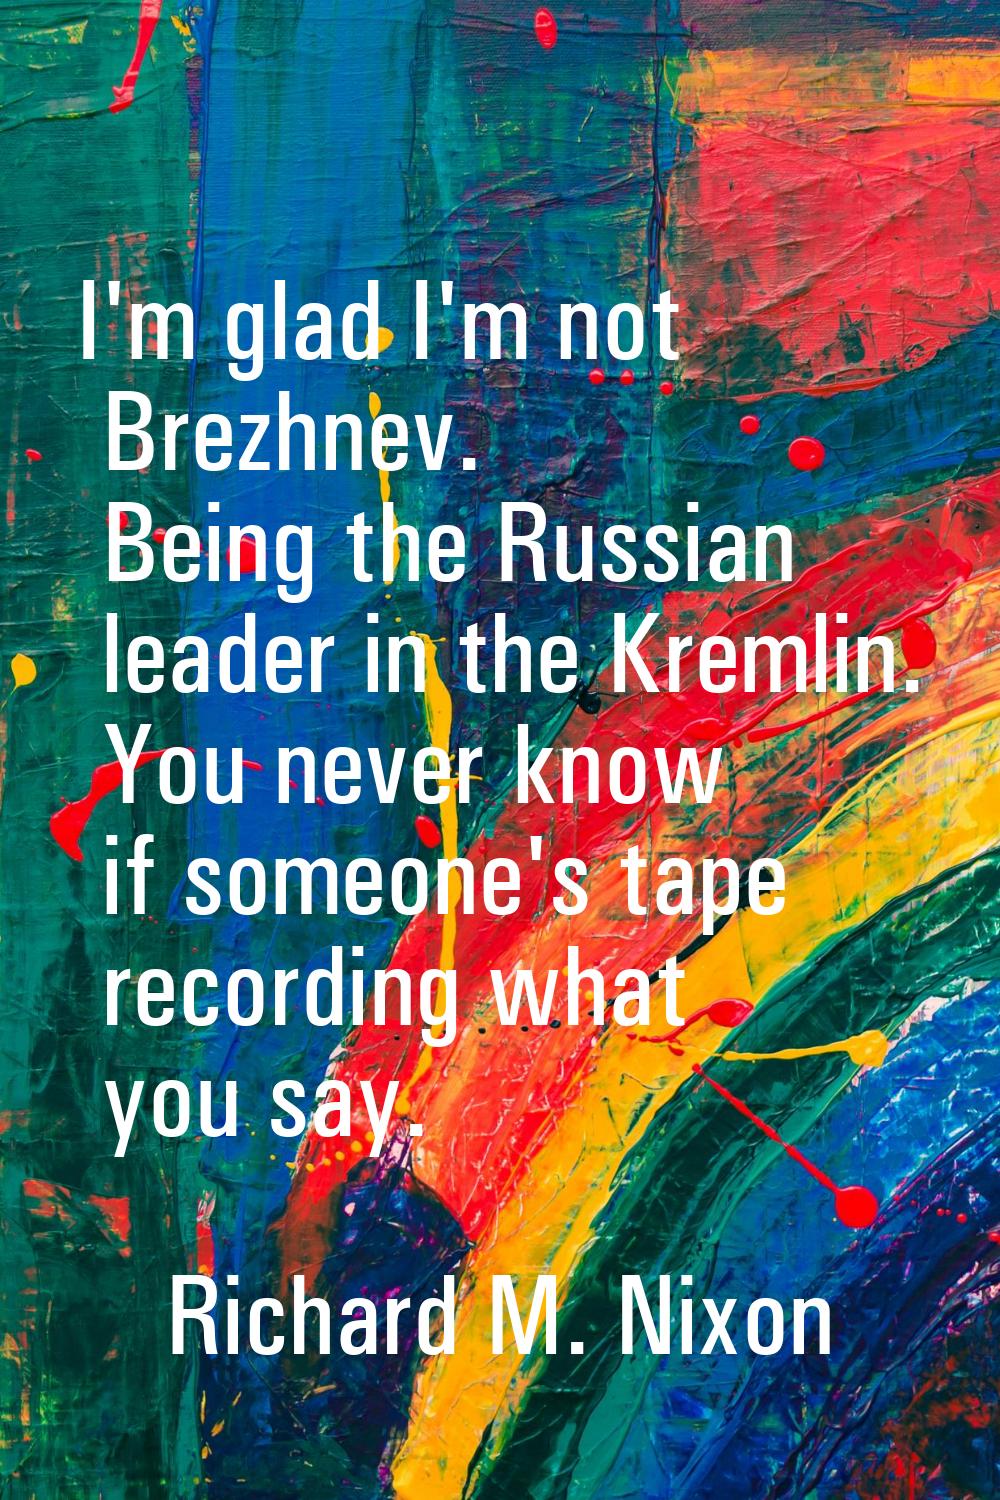 I'm glad I'm not Brezhnev. Being the Russian leader in the Kremlin. You never know if someone's tap